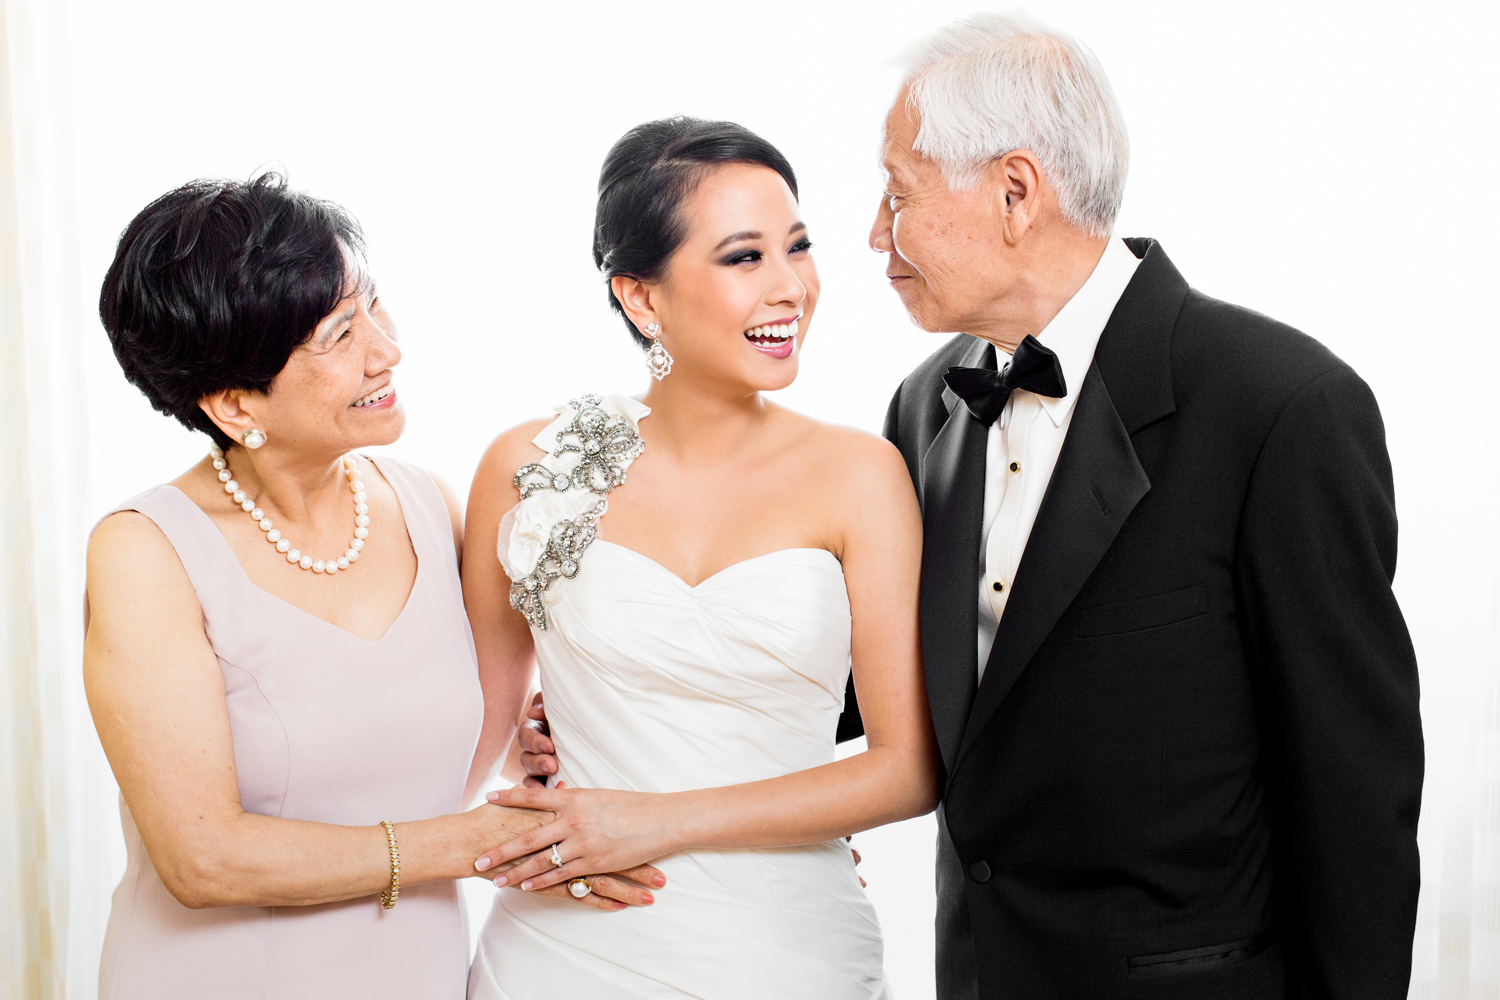 This was a beautiful moment between a bride and her parents, Mom is staring lovingly at her daughter and dad is all smiles, The bride is in between them and they look so happy and in the moment, This was taken in Bethesda Maryland. They are Asian. Procopio Photography, best top Washington DC photographer, best top Maryland photographer, best top Virginia photographer, best top DMV photographer, best top wedding photographer, best top commercial photographer, best top portrait photographer, best top boudoir photographer, modern fine art portraits, dramatic, unique, different, bold, editorial, photojournalism, award winning photographer, published photographer, memorable images, be different, stand out